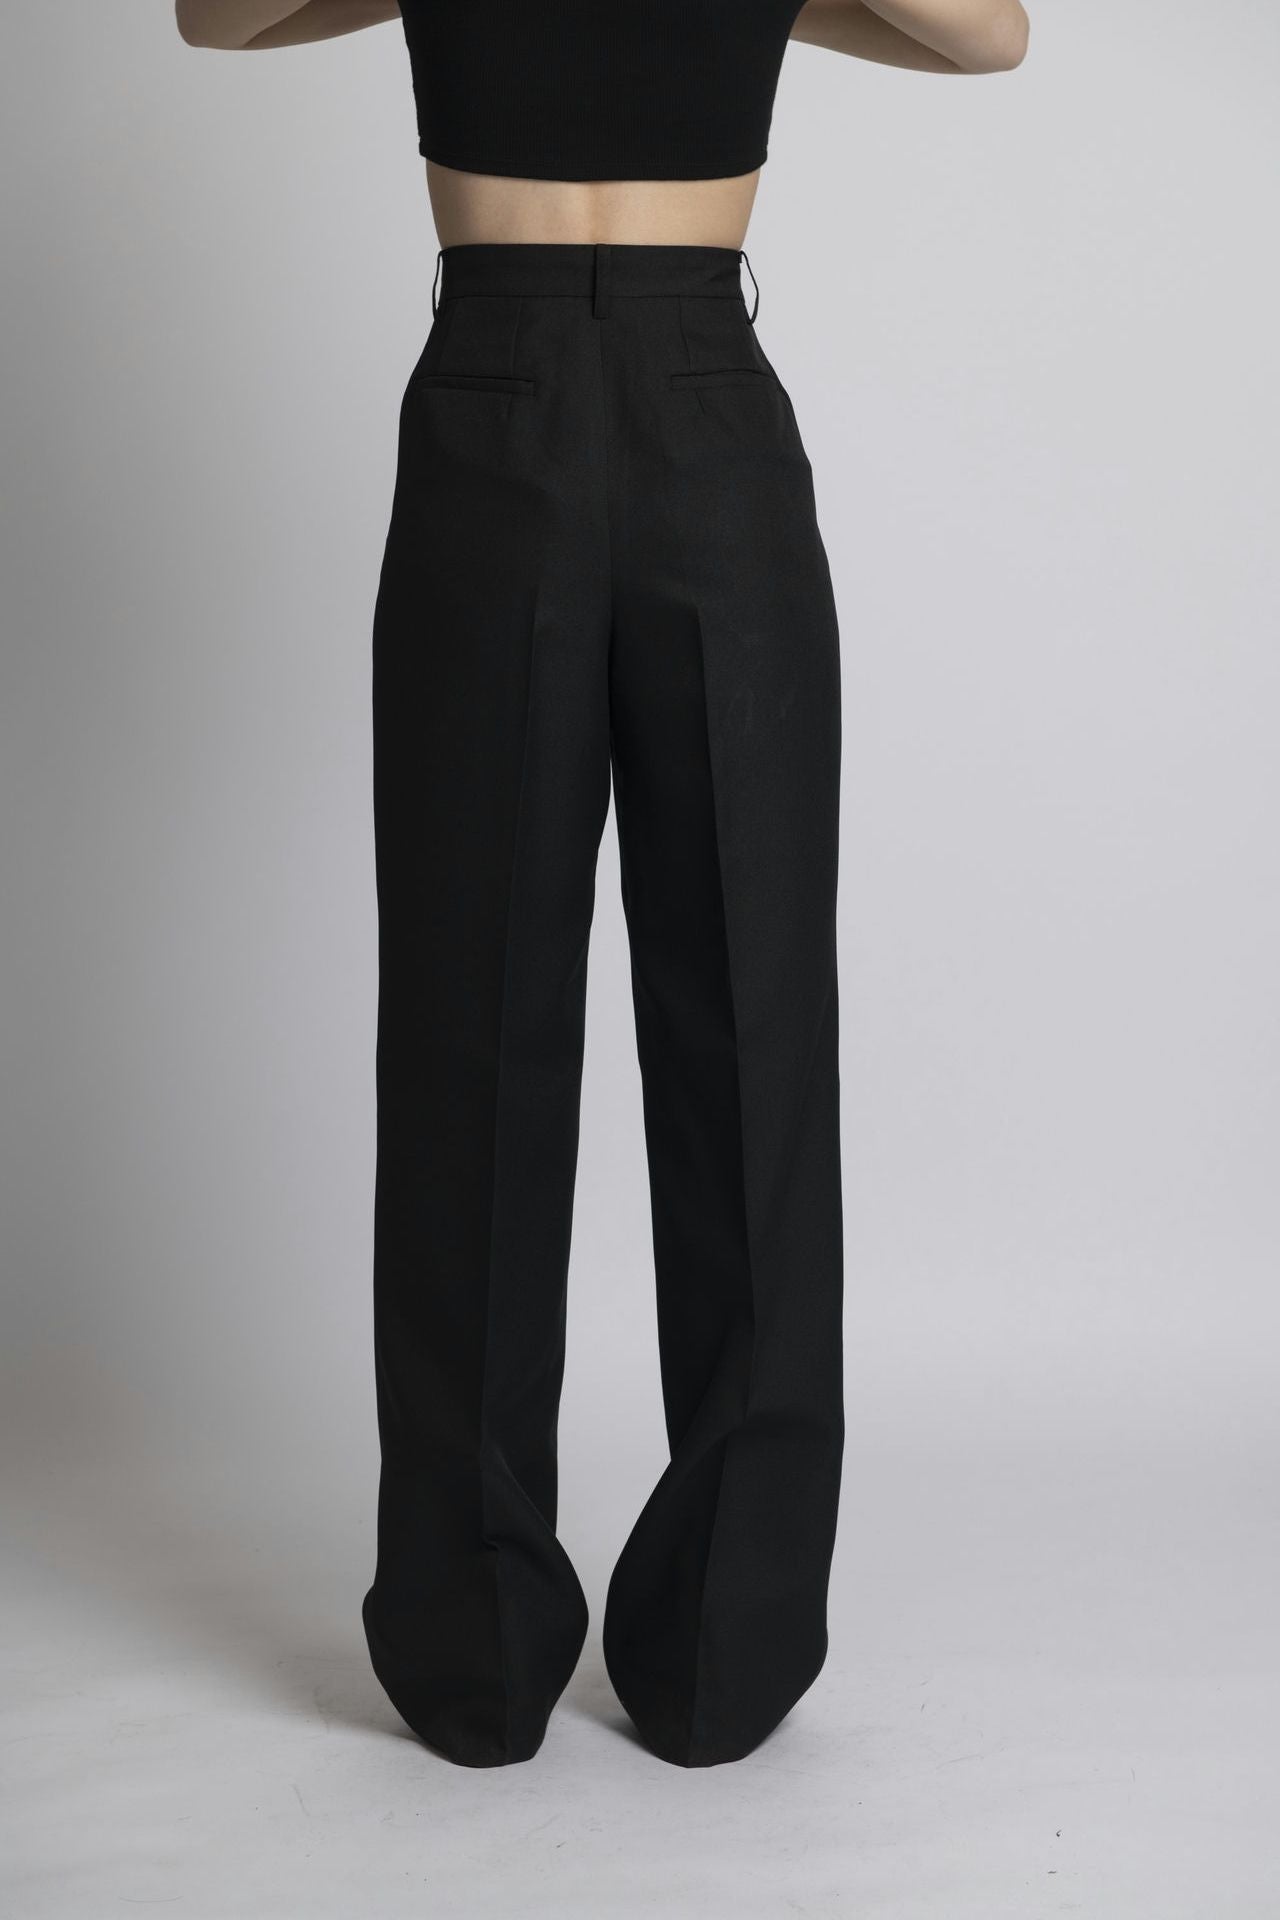 1930s inspired high waist trousers